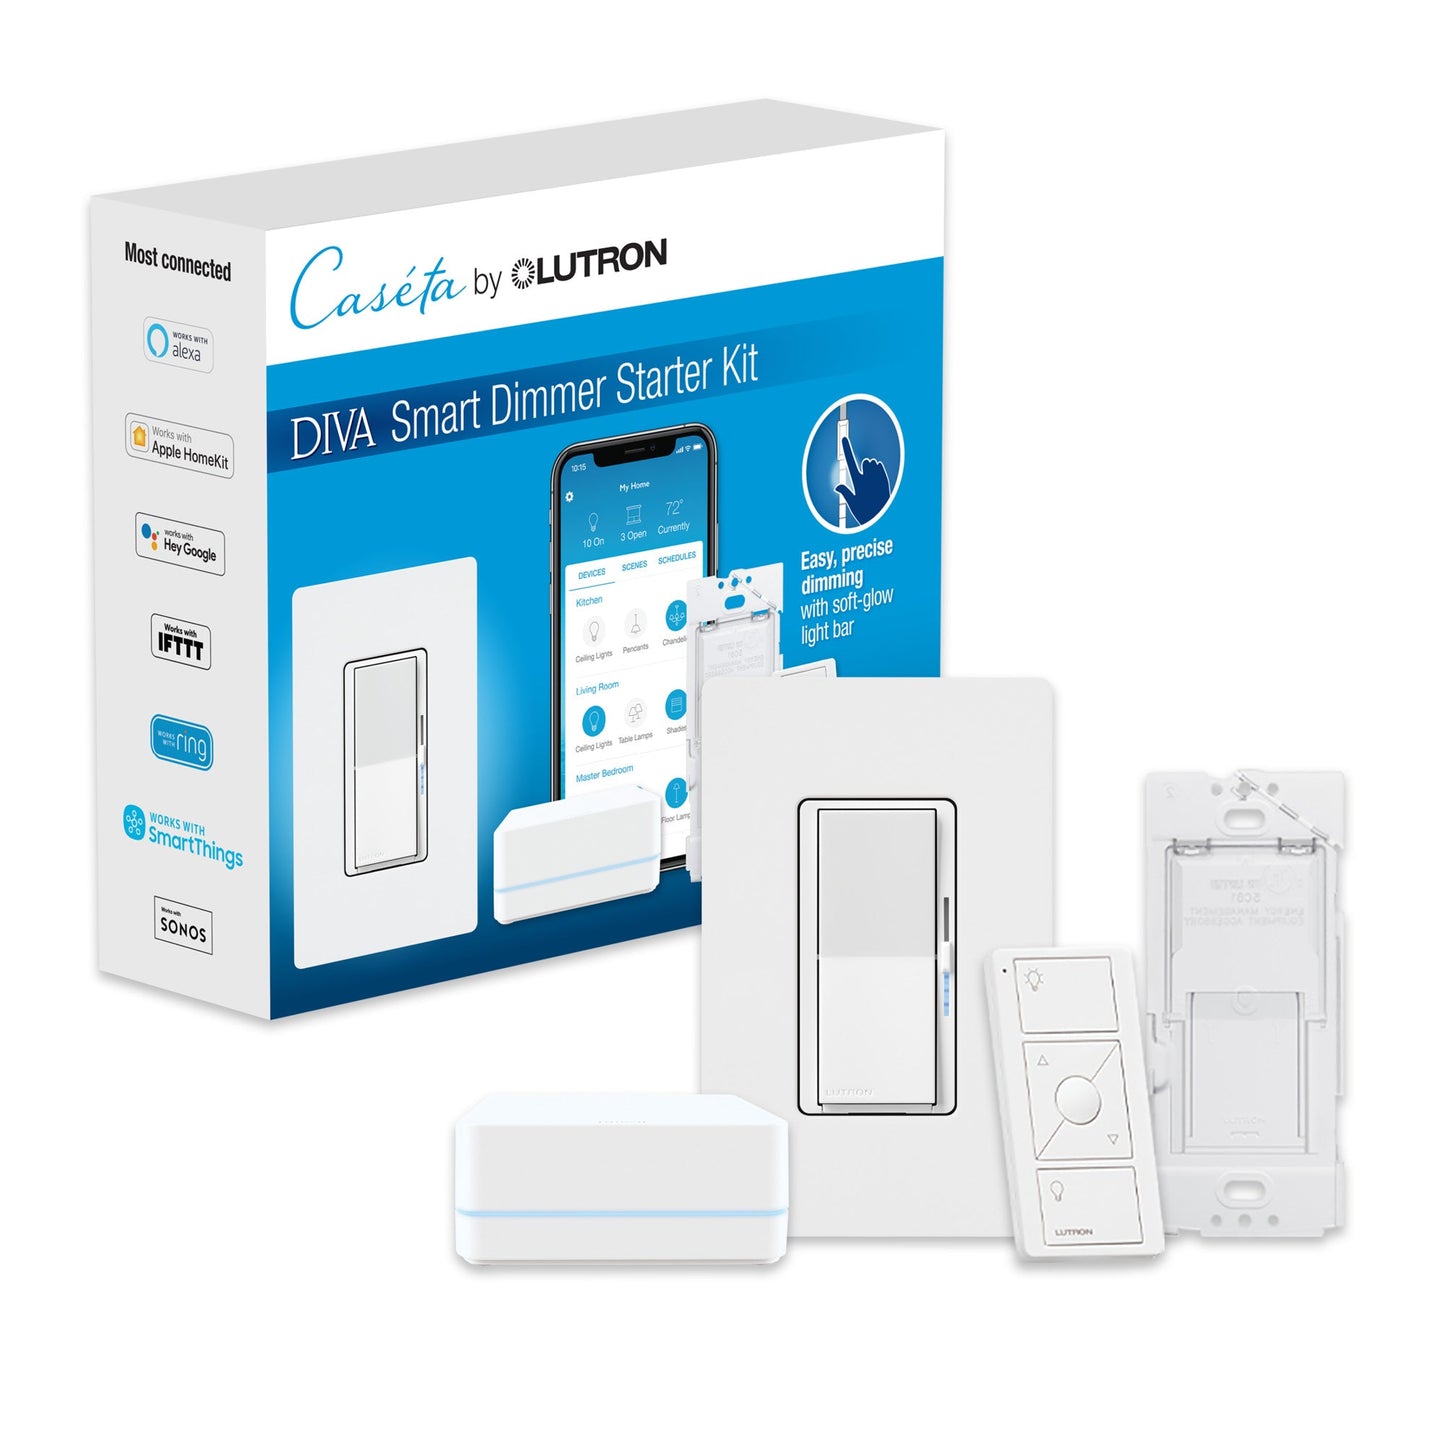 Lutron Diva Smart Dimmer Switch Starter Kit for Caseta Smart Lighting, with Smart Hub and Pico Remote - Nyson Retail